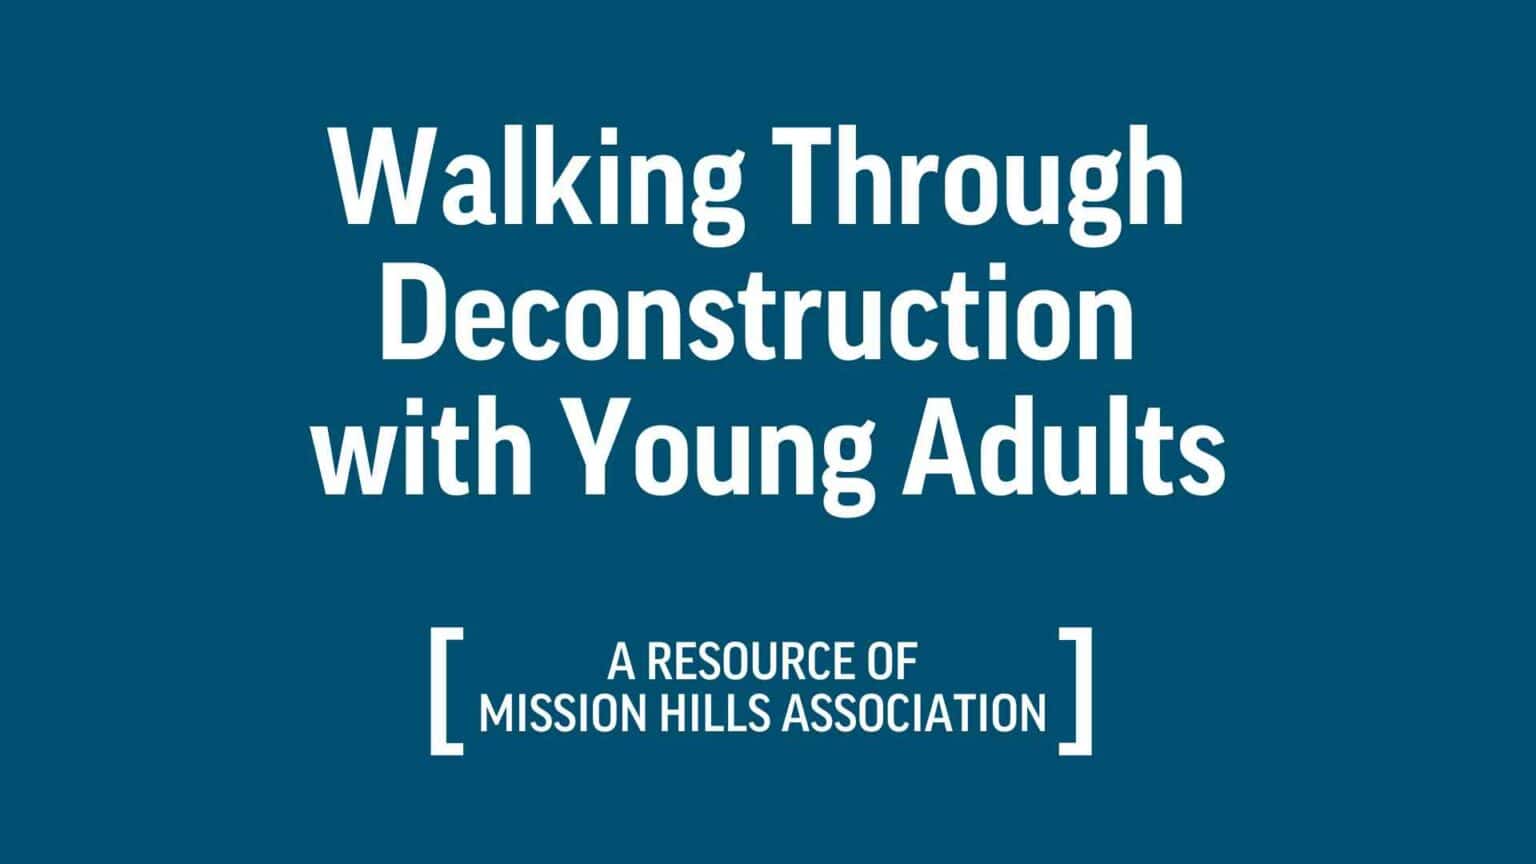 Walking Through Deconstruction with Young Adults